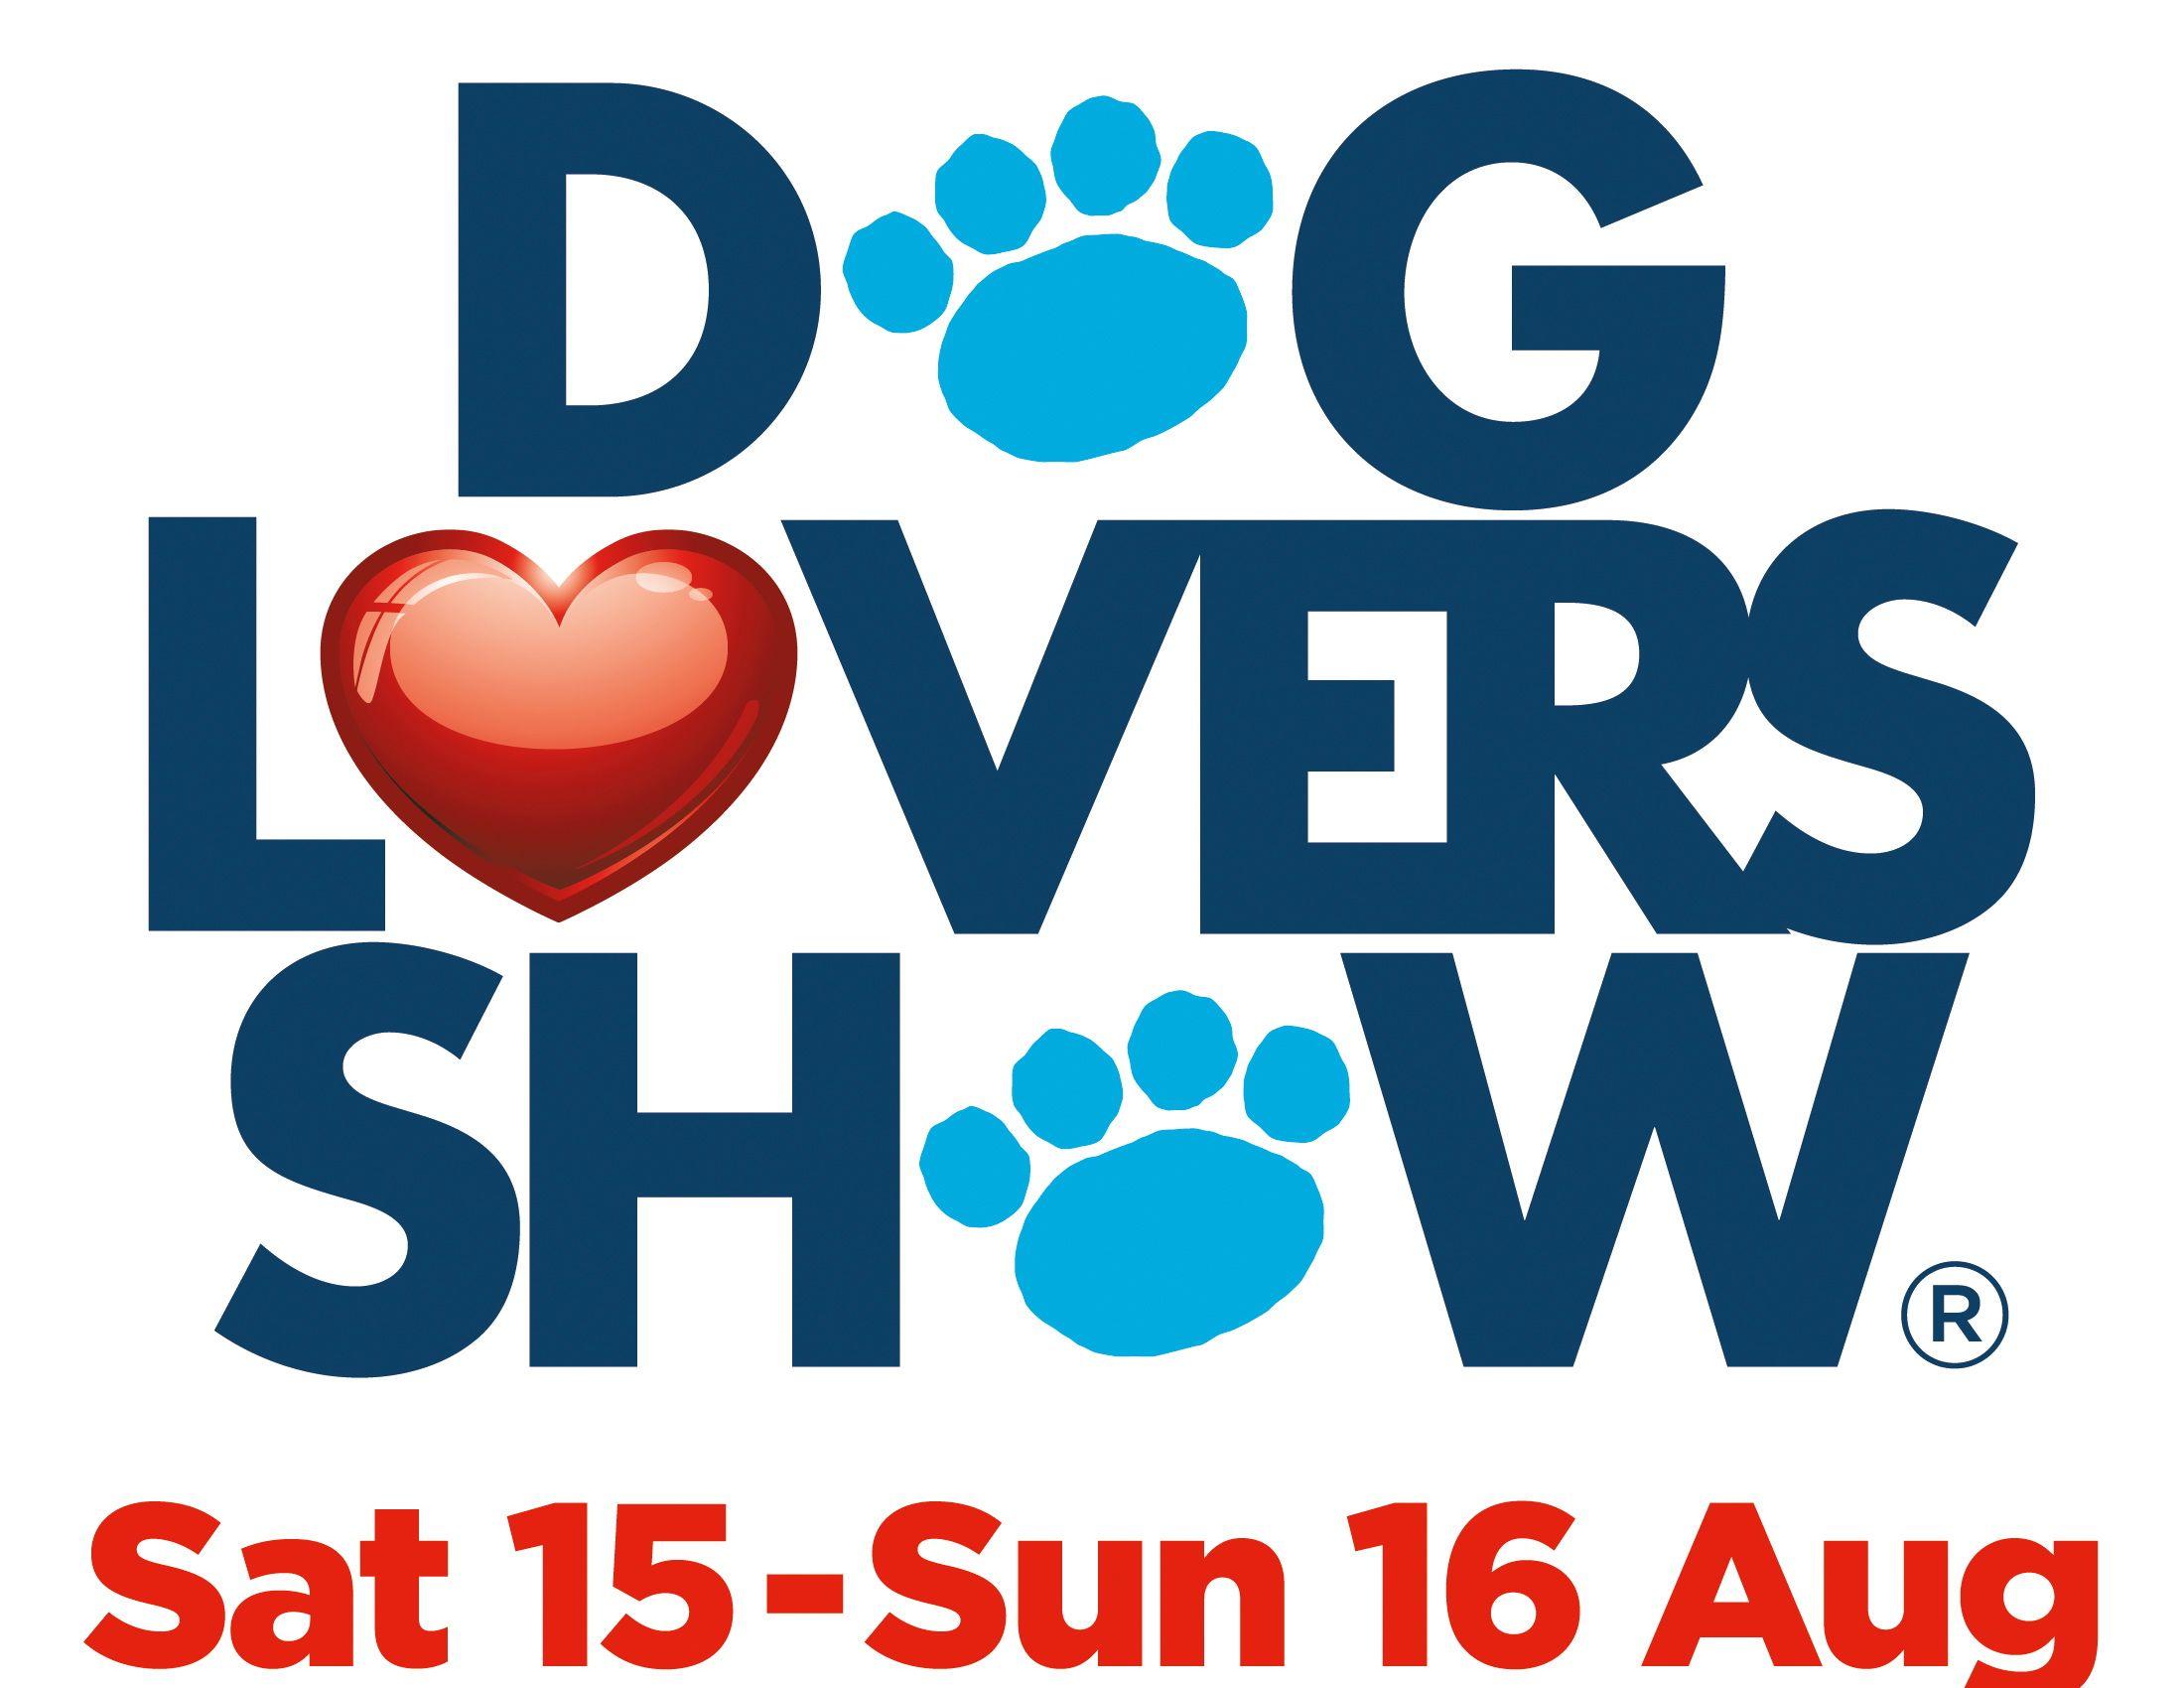 Dog Lovers Show